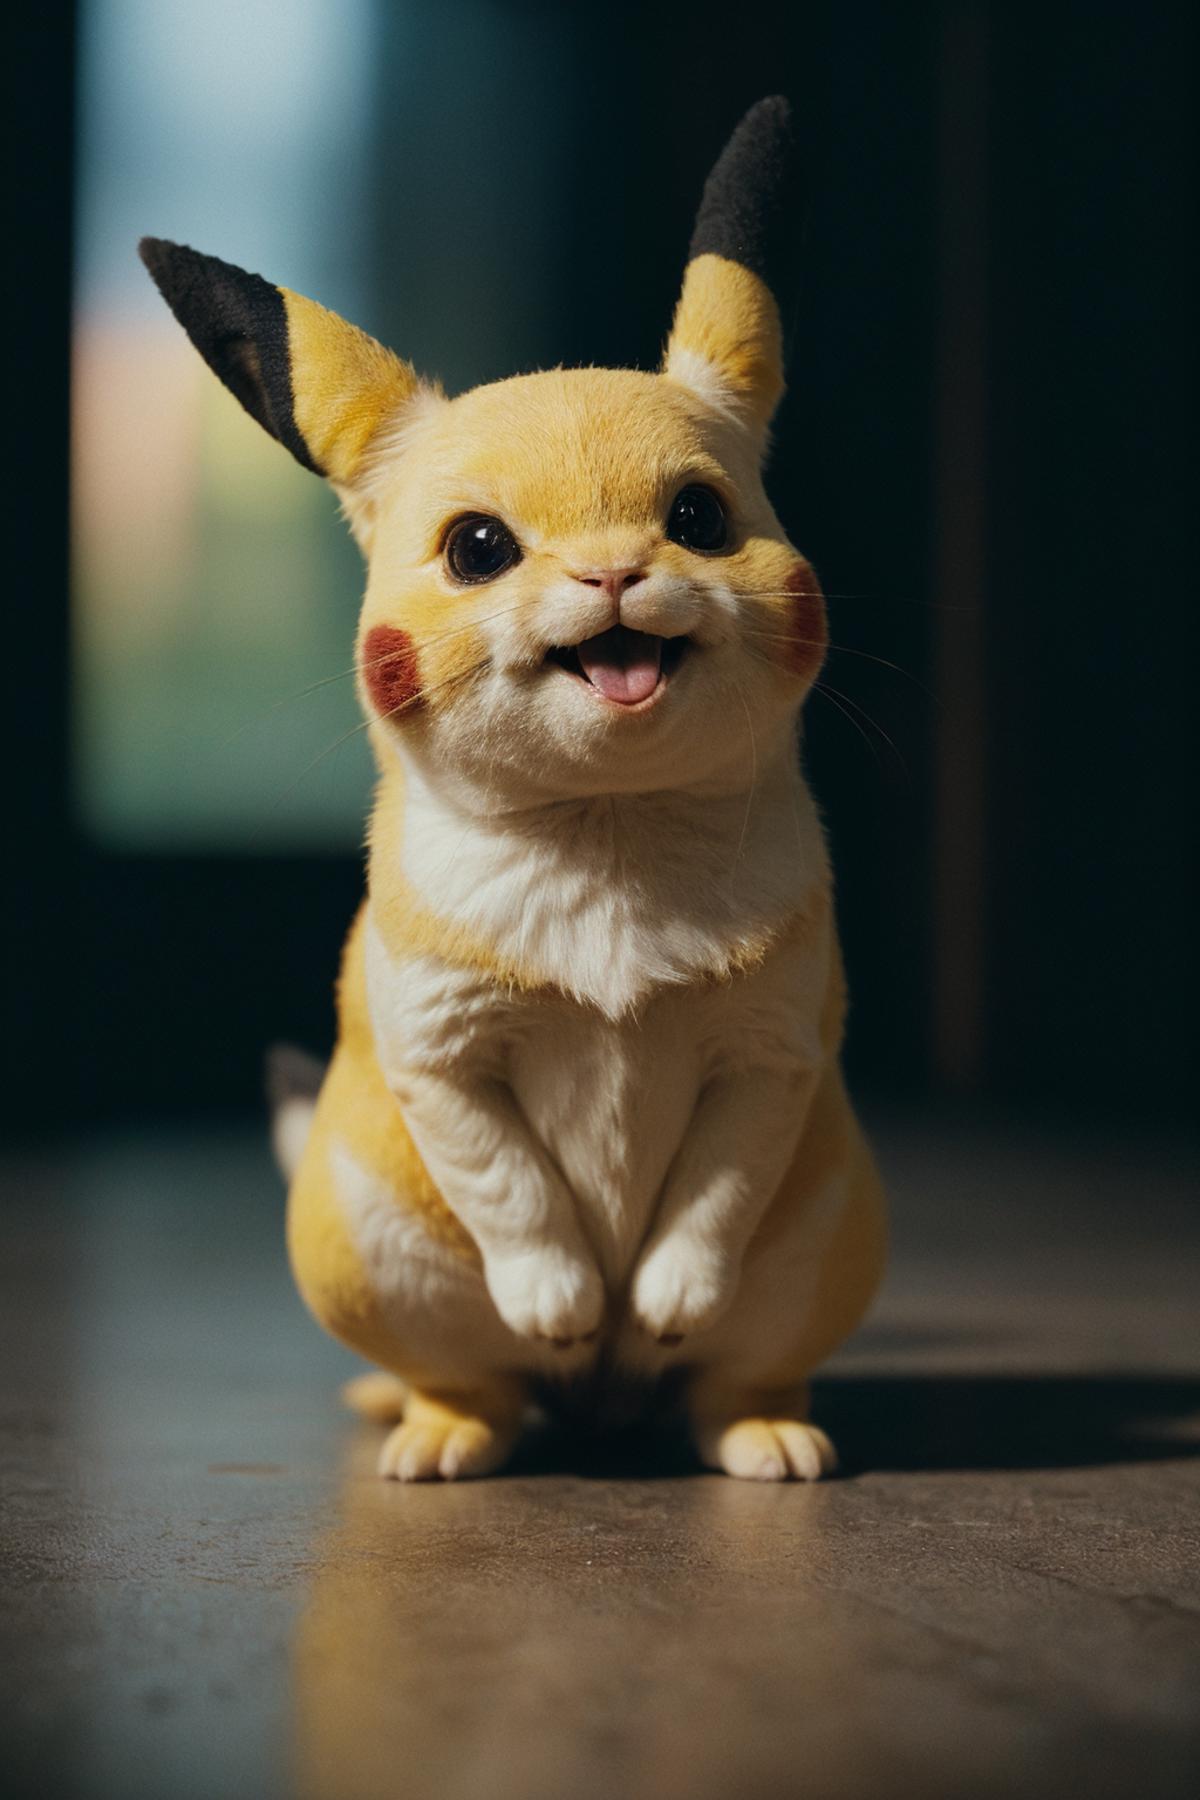 A yellow and white Pokemon Pikachu figurine with a black nose and ears, standing on a floor.